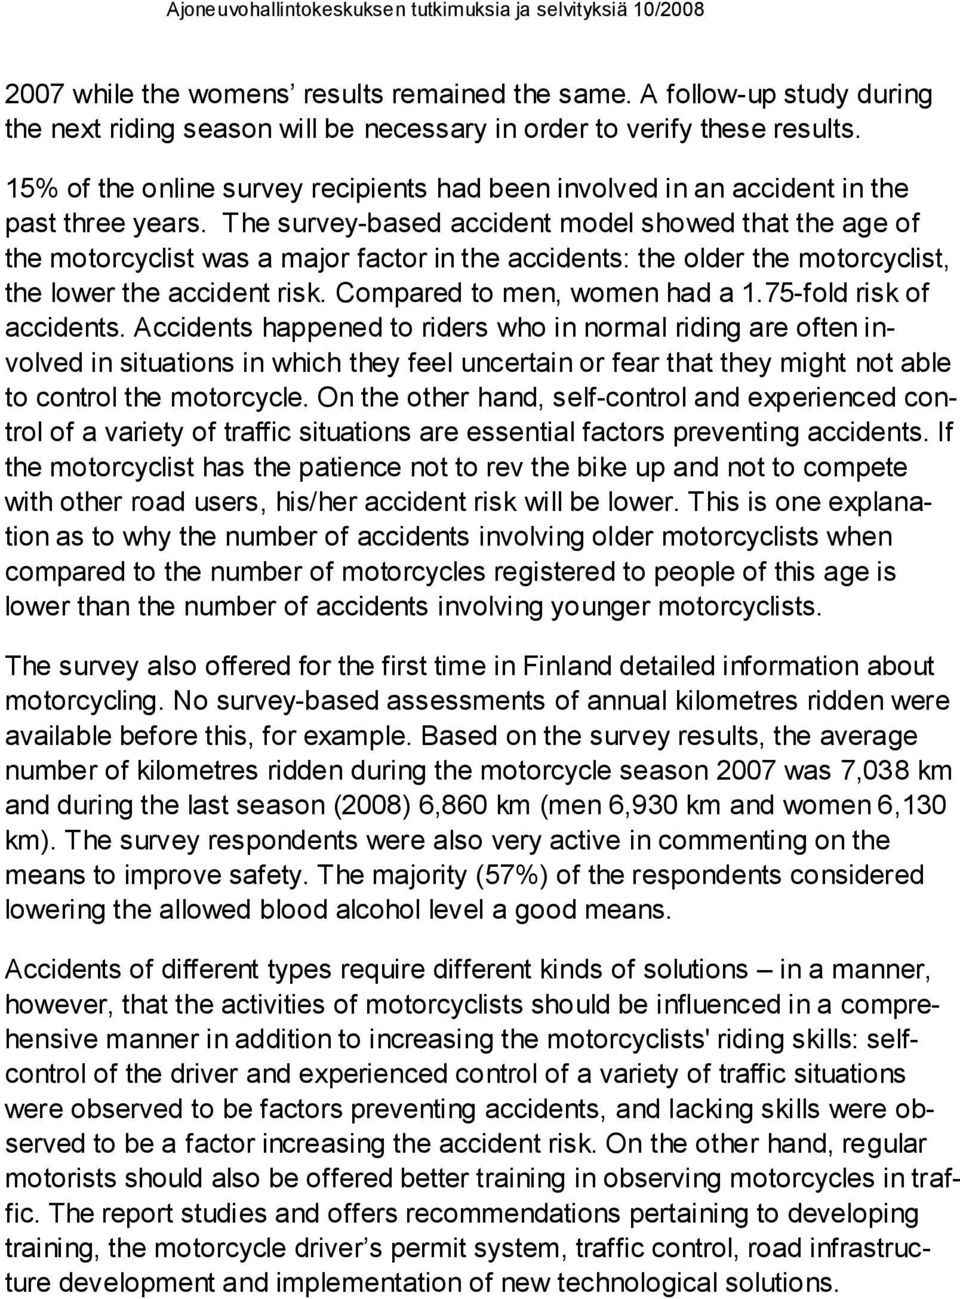 The survey-based accident model showed that the age of the motorcyclist was a major factor in the accidents: the older the motorcyclist, the lower the accident risk. Compared to men, women had a 1.